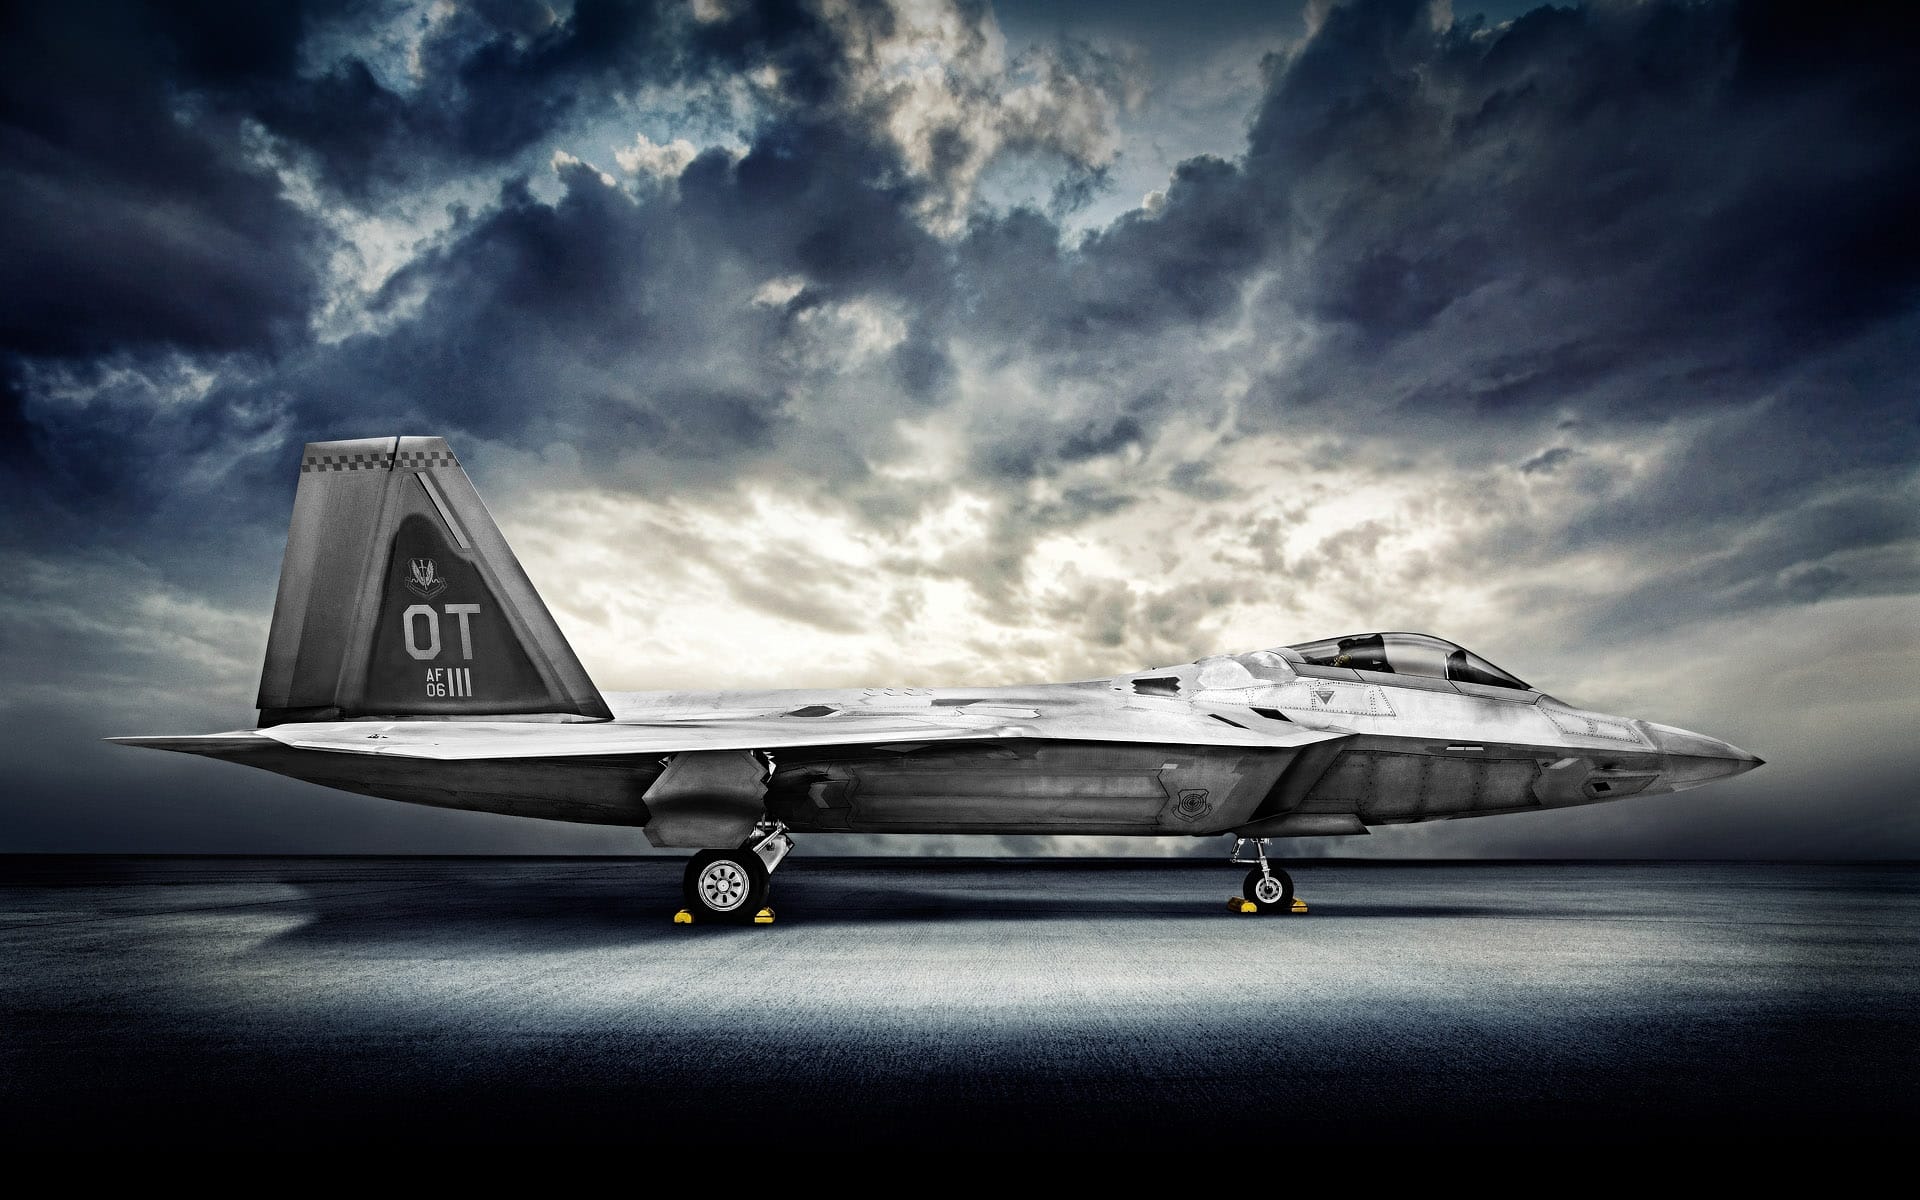 F22 Raptor photographed by Phoenix Commercial Photographer Blair Bunting